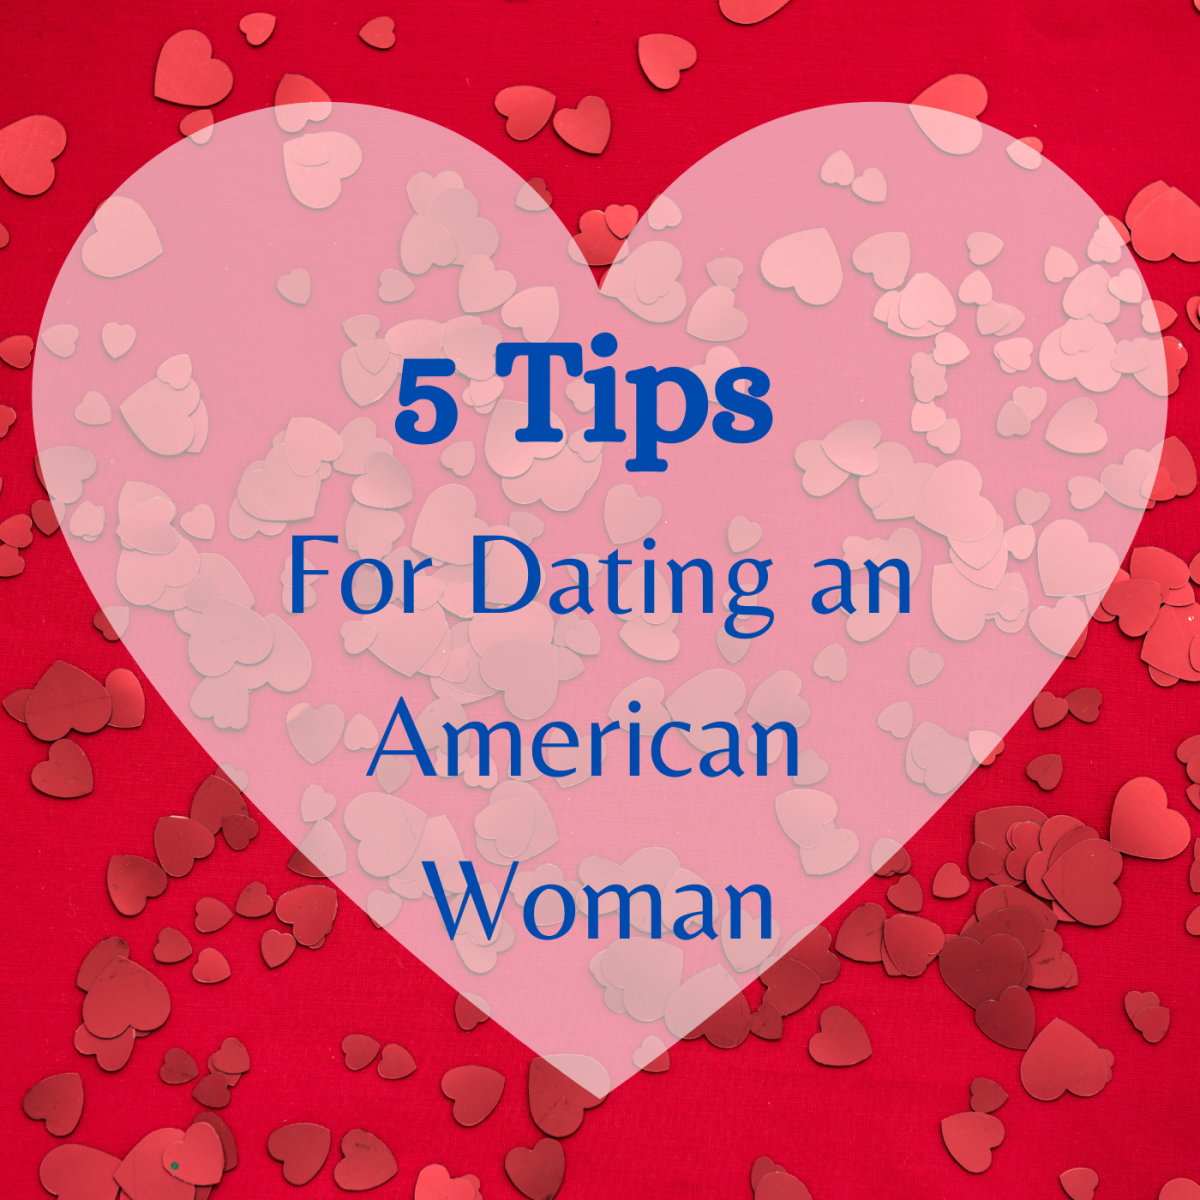 Follow these five tips for a successful relationship with an American woman.